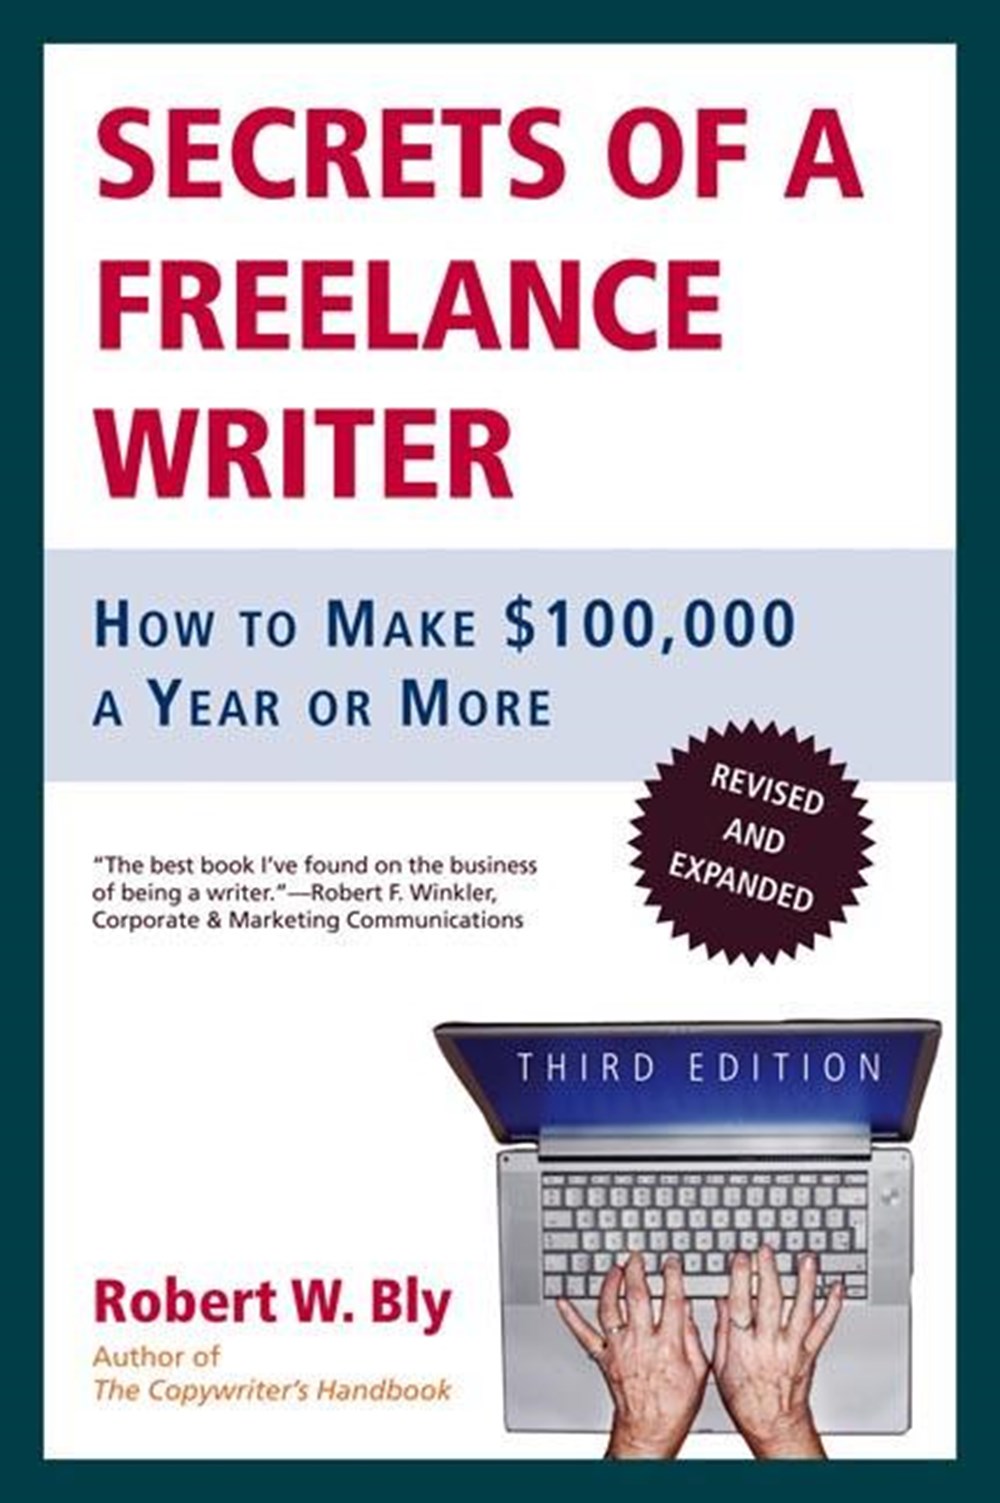 Secrets of a Freelance Writer: How to Make $100,000 a Year or More (Third Edition, Revised)